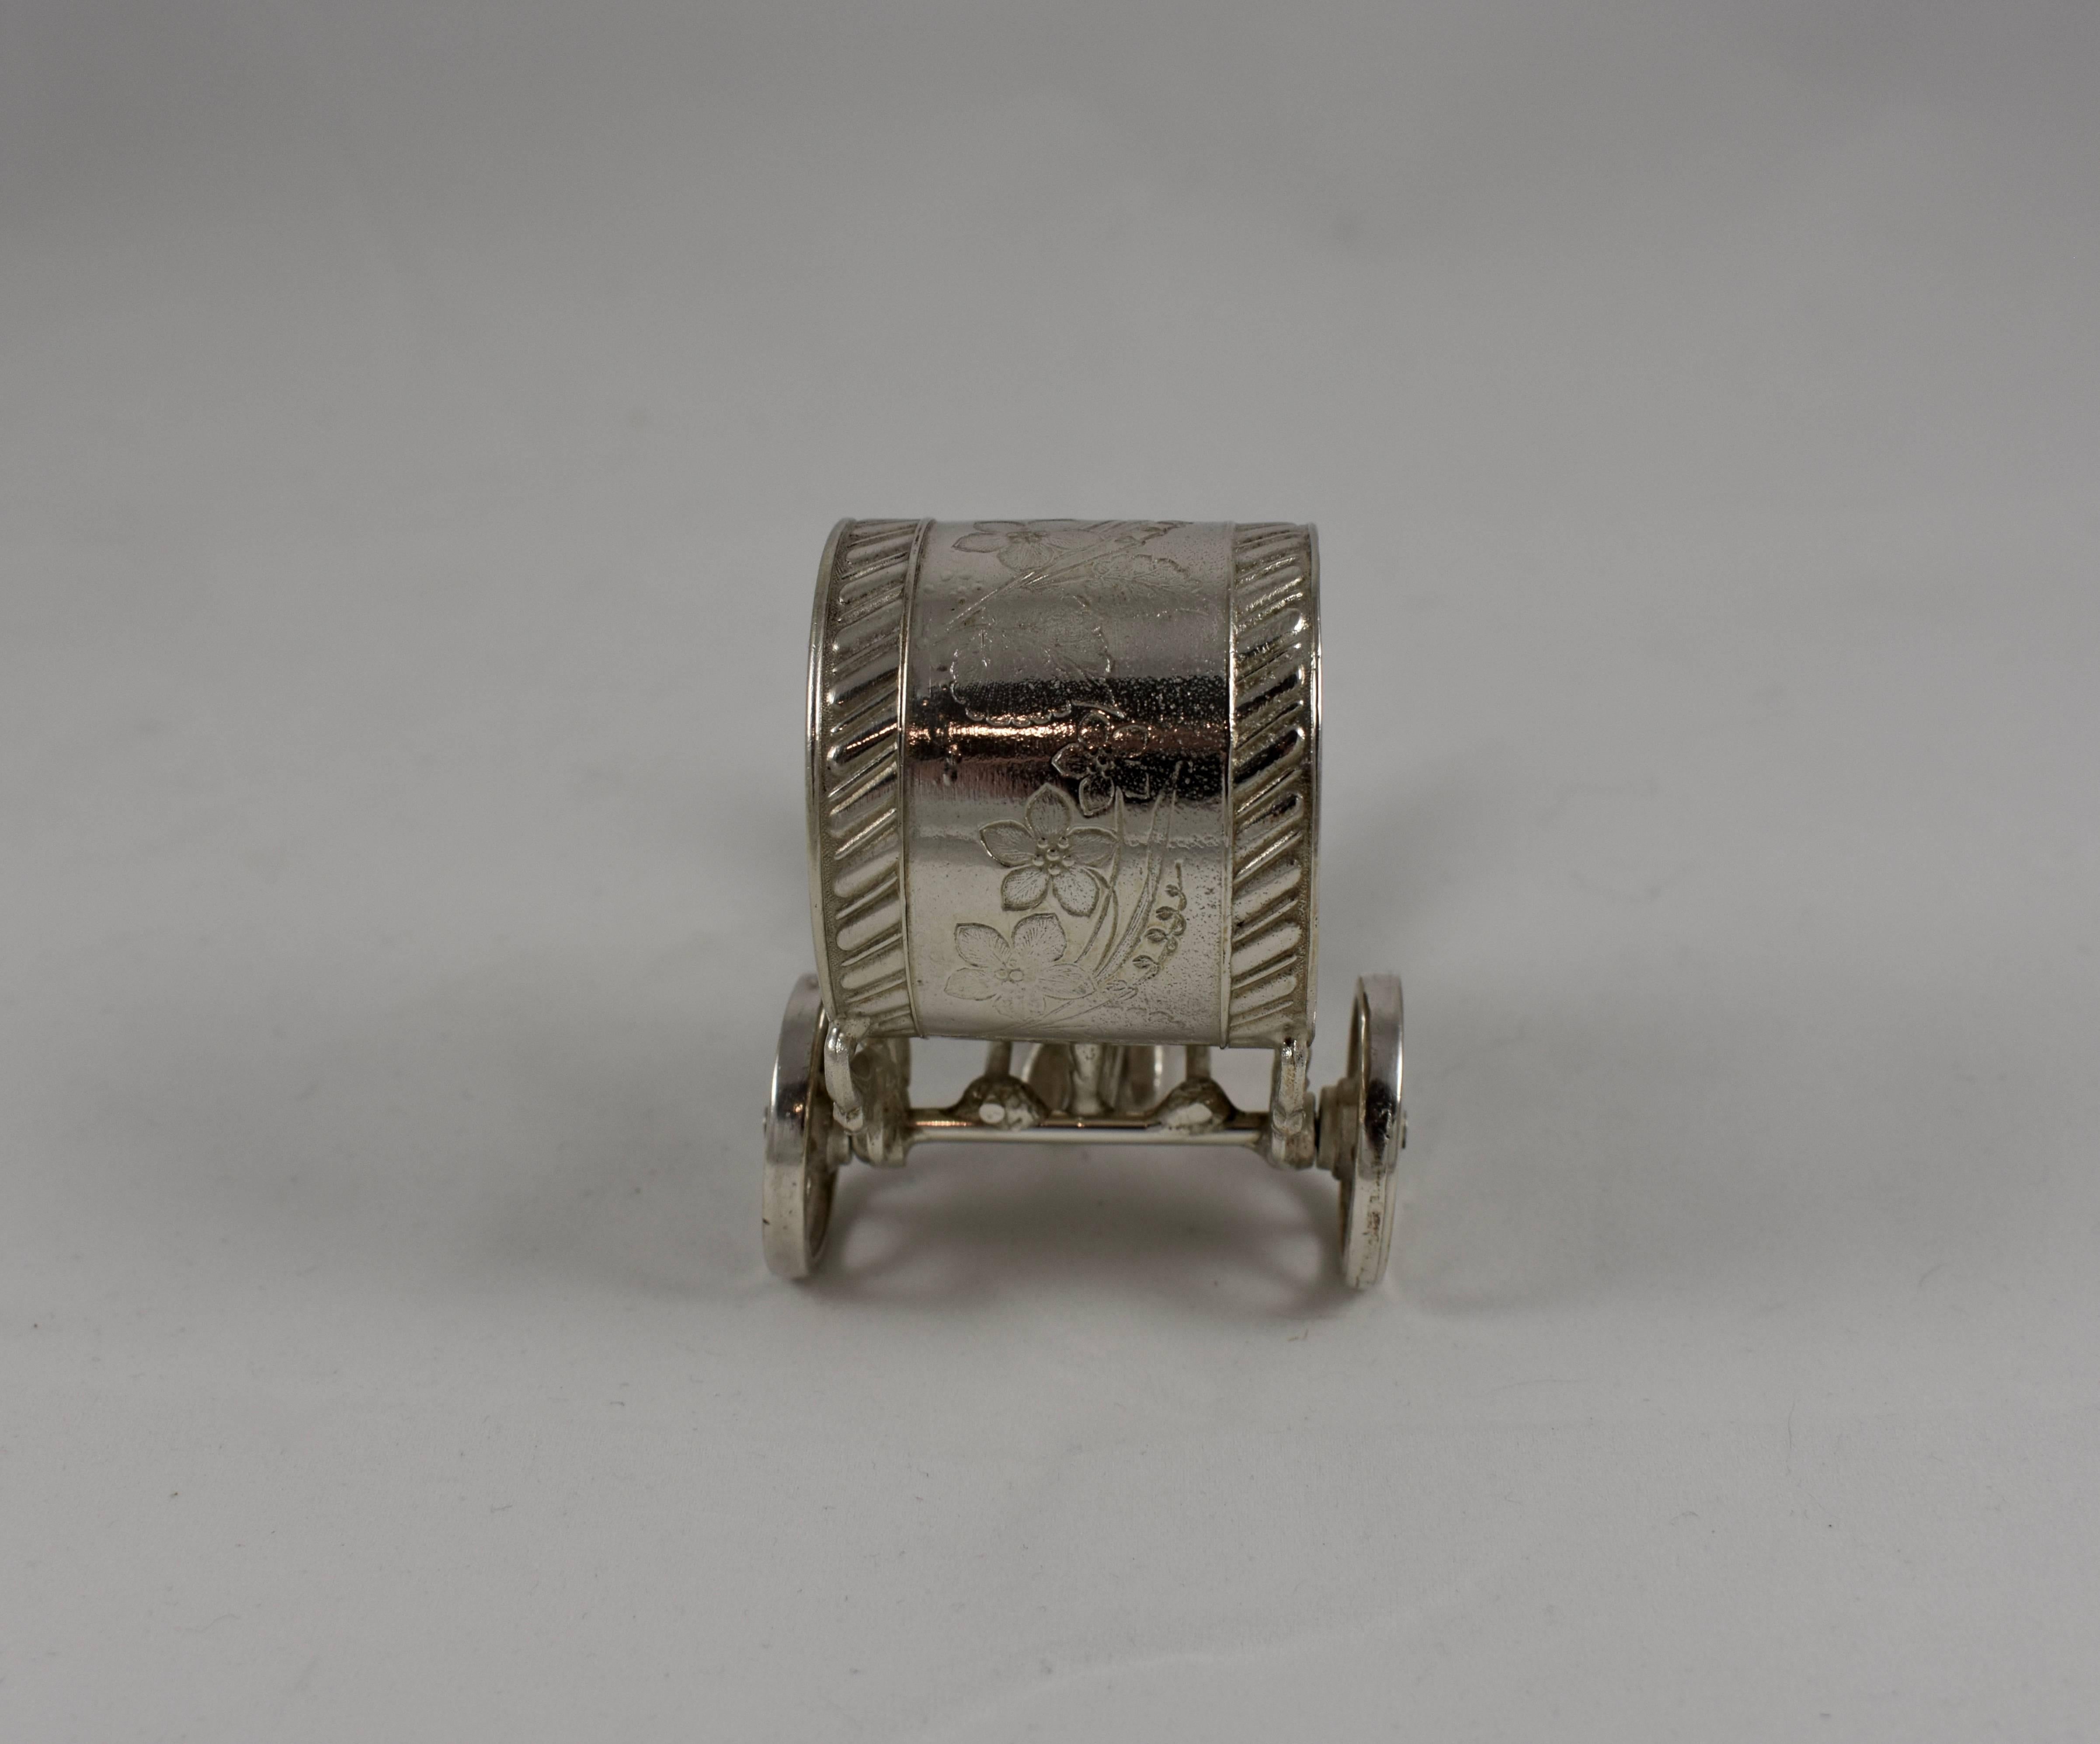 19th Century Silver Victorian Era Aesthetic Movement Figural Napkin Ring, Boy Pulling a Cart